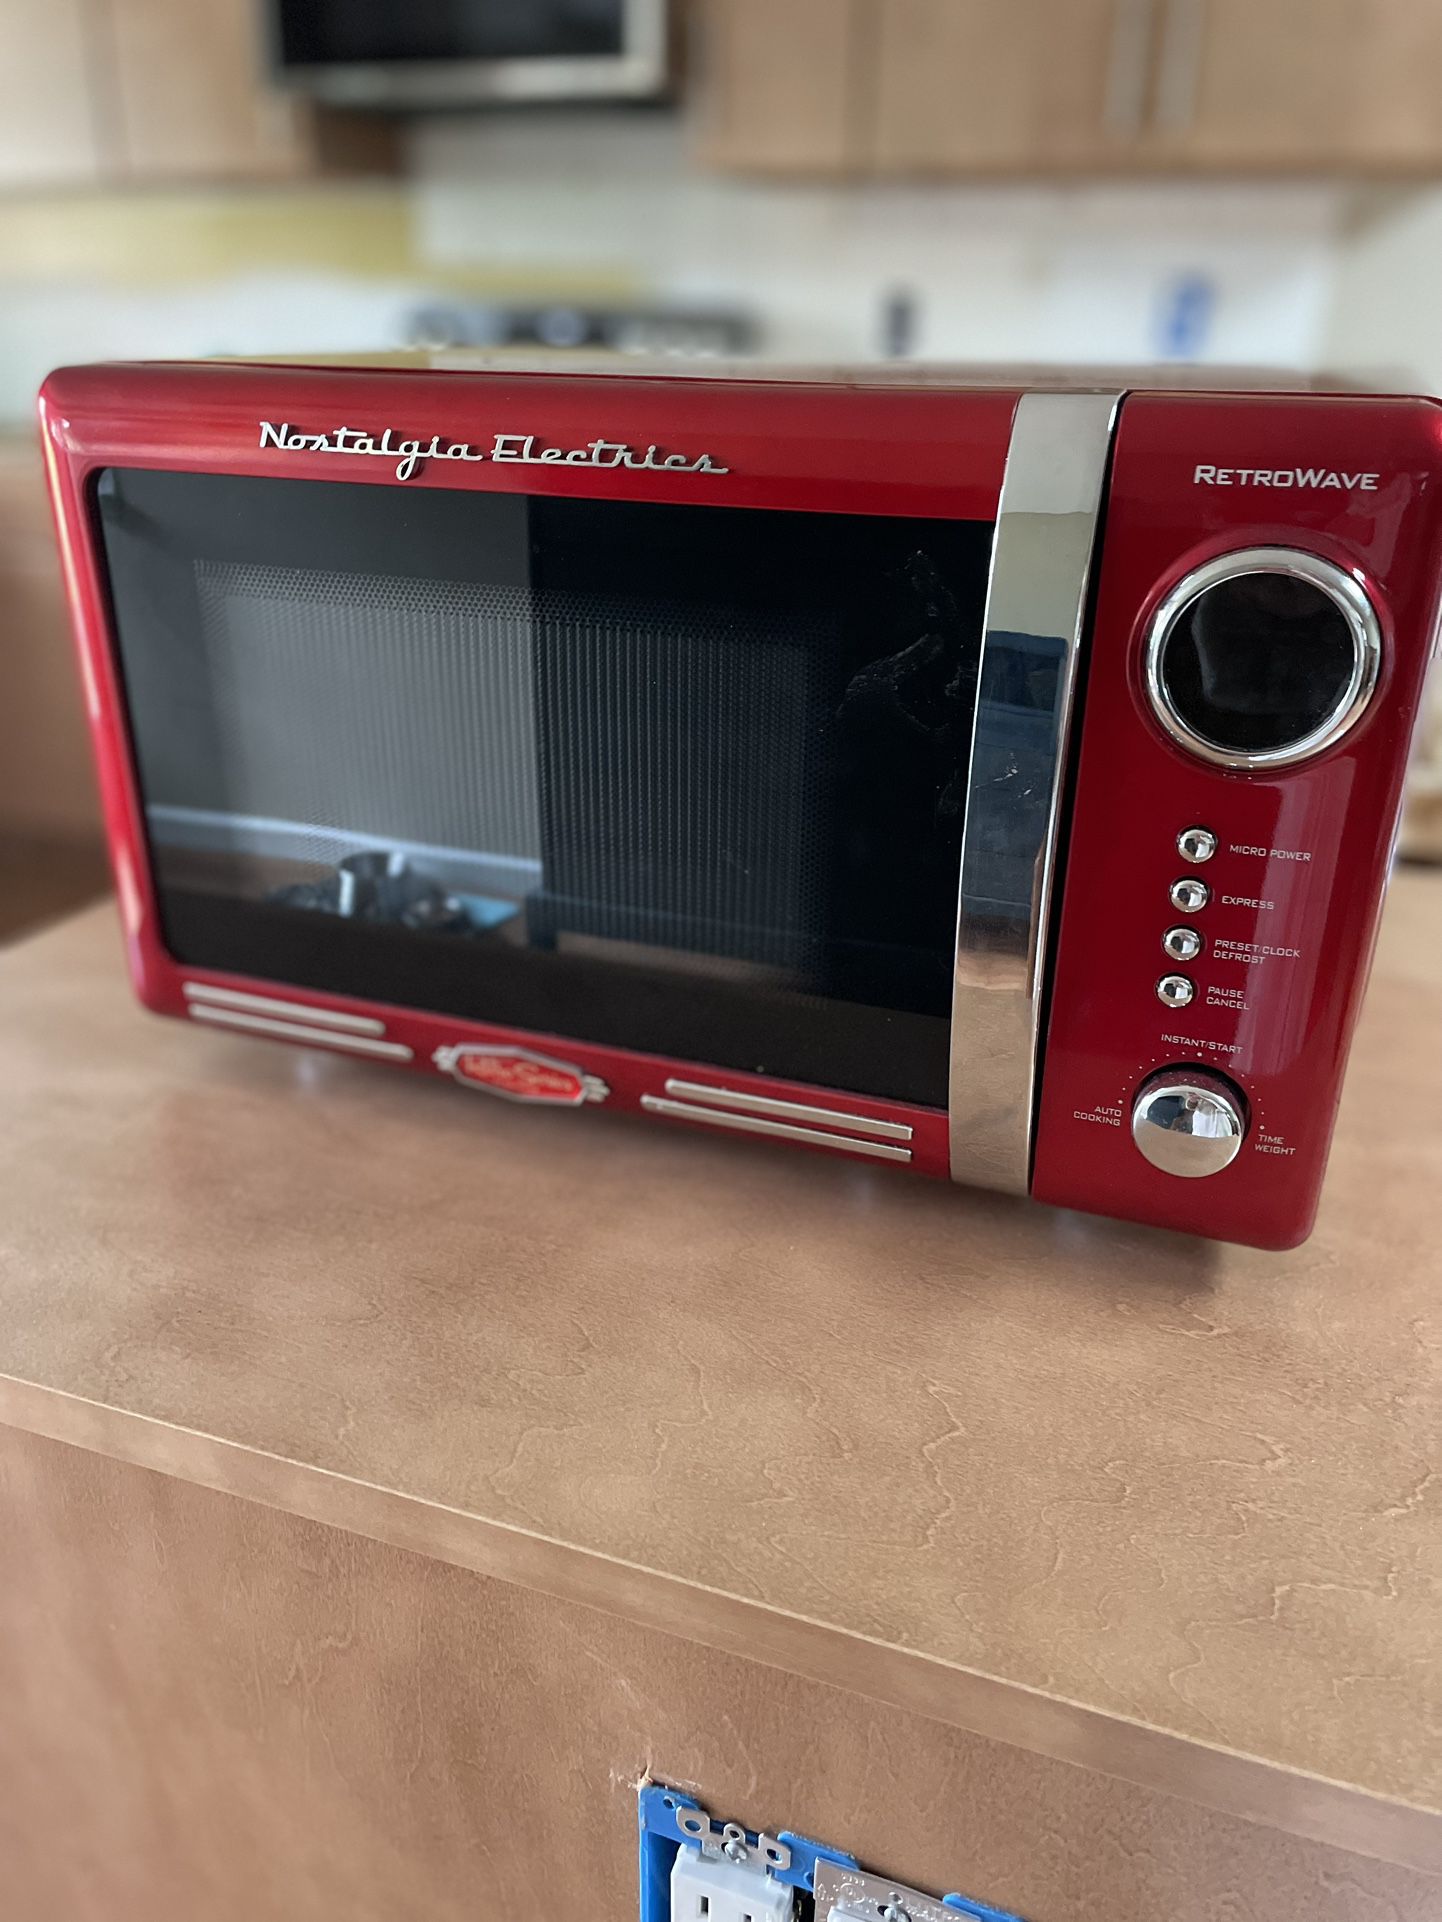 Small Countertop Microwave $35